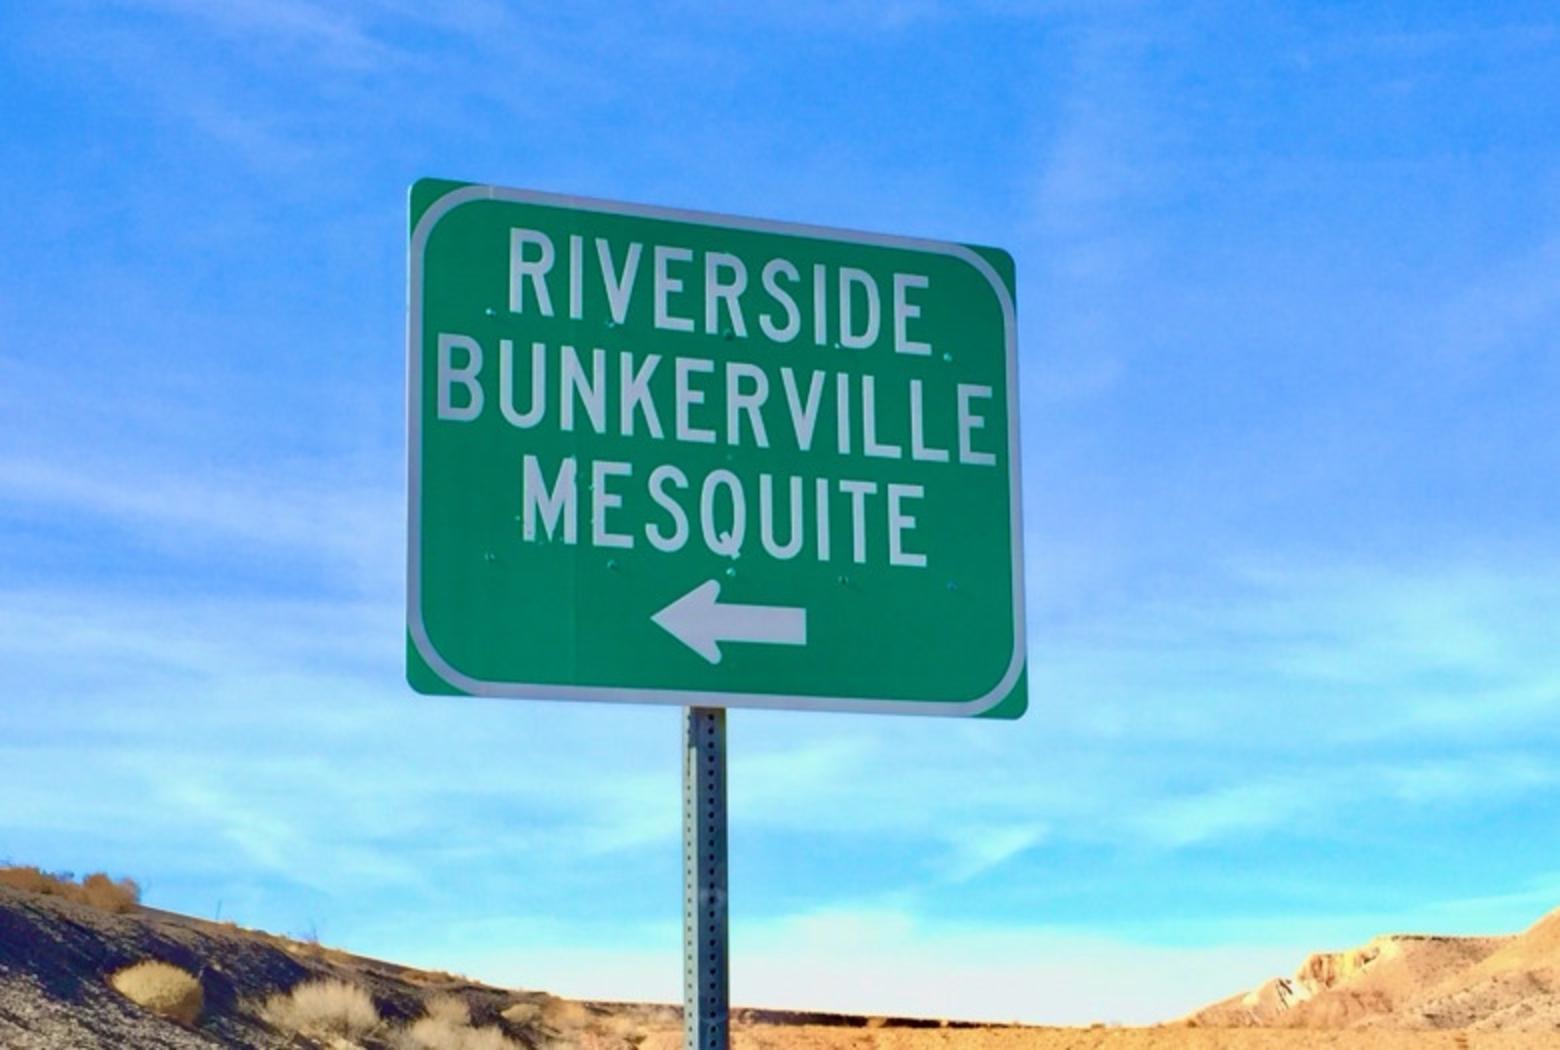 Bunkerville, Nevada, located on the edge of the Mojave Desert, is a tough place to grow cattle and as home to the Bundys it has become a hotbed of armed anti-government rhetoric defying laws and history. Photo by Todd Wilkinson